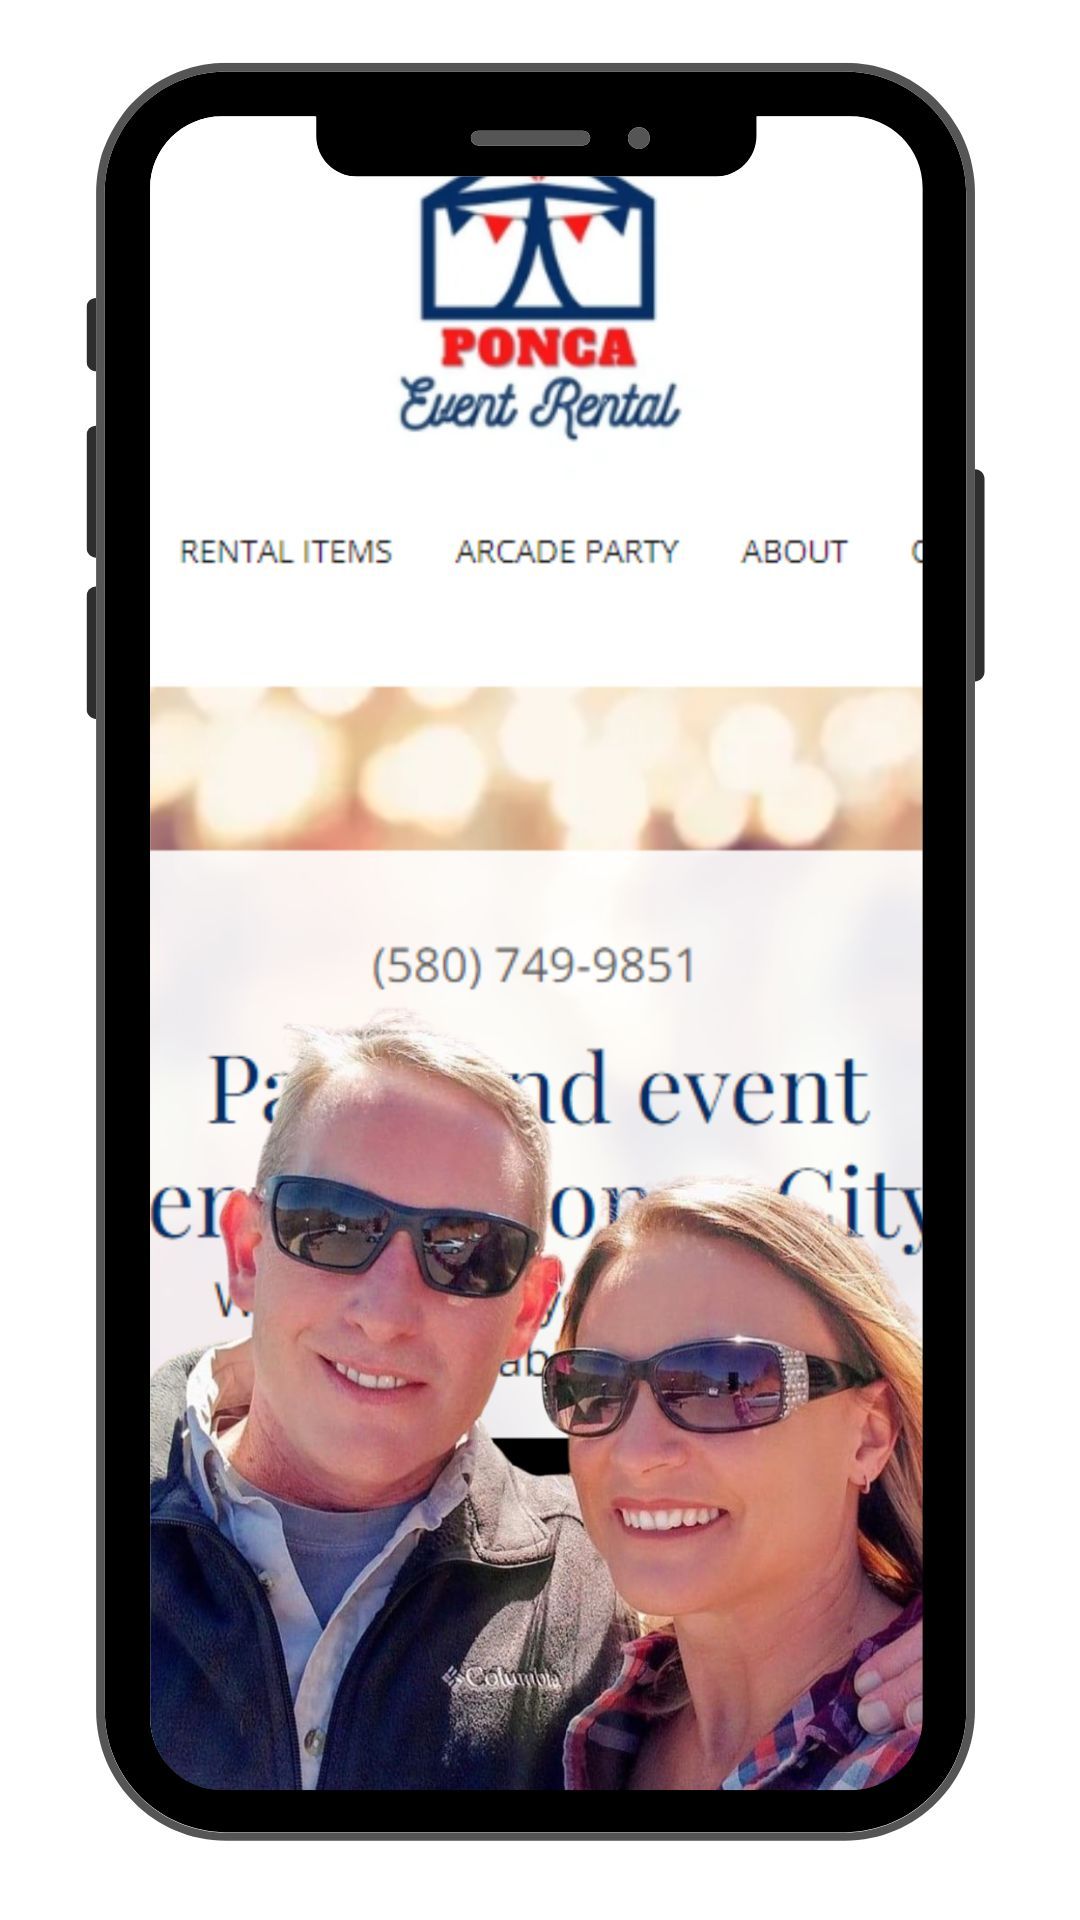 a website for party and event rental